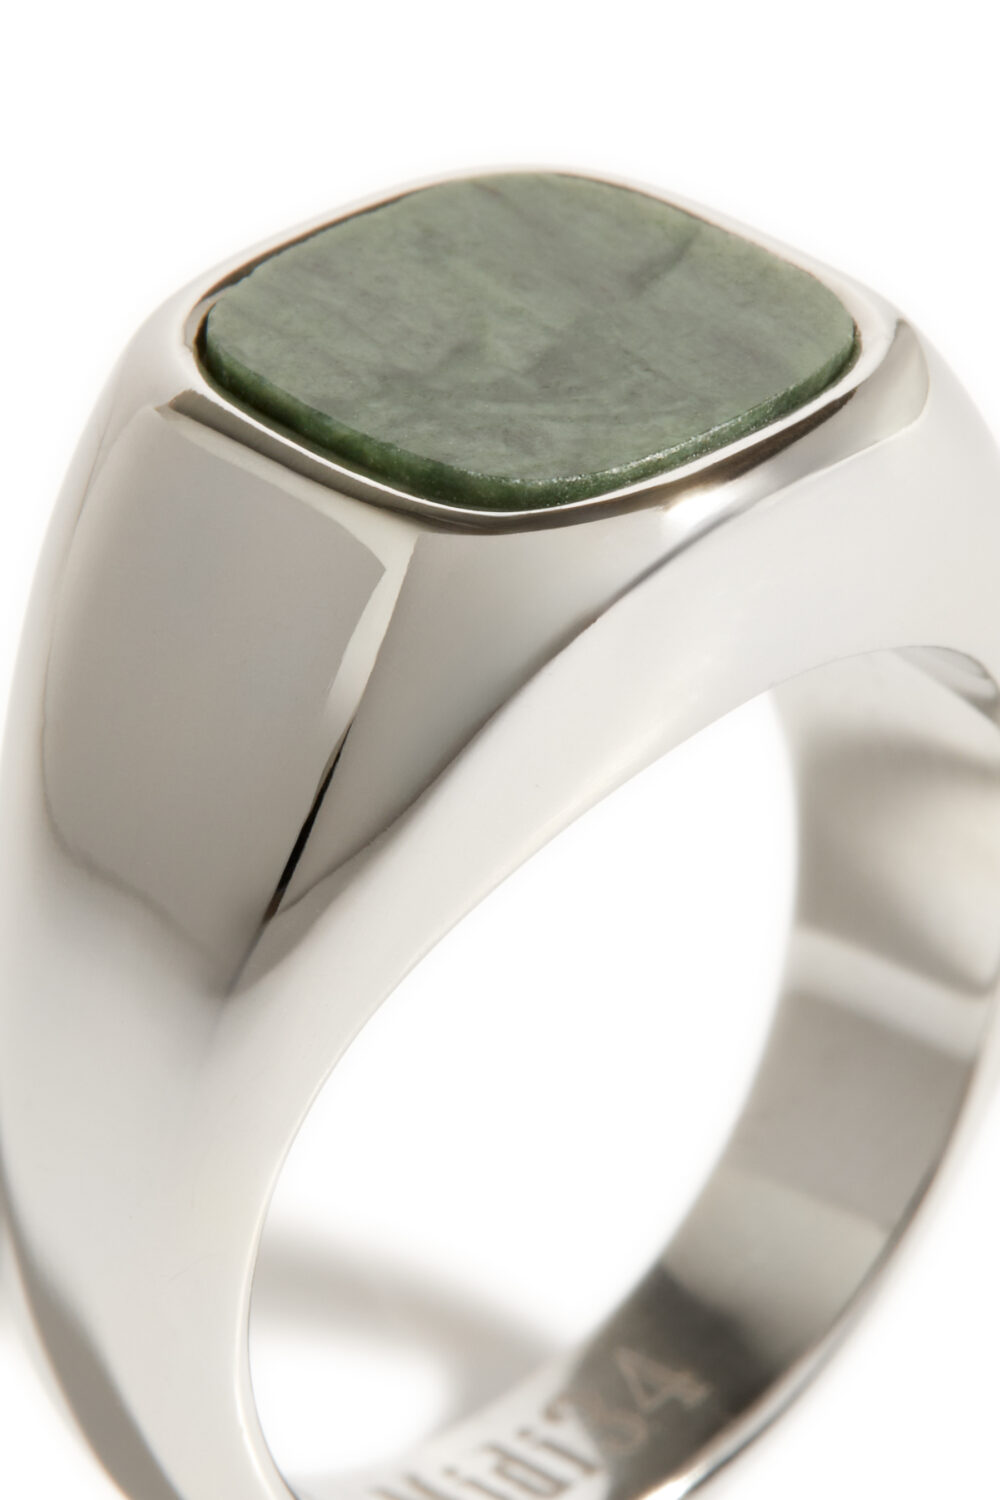 Clement ring - Green marble